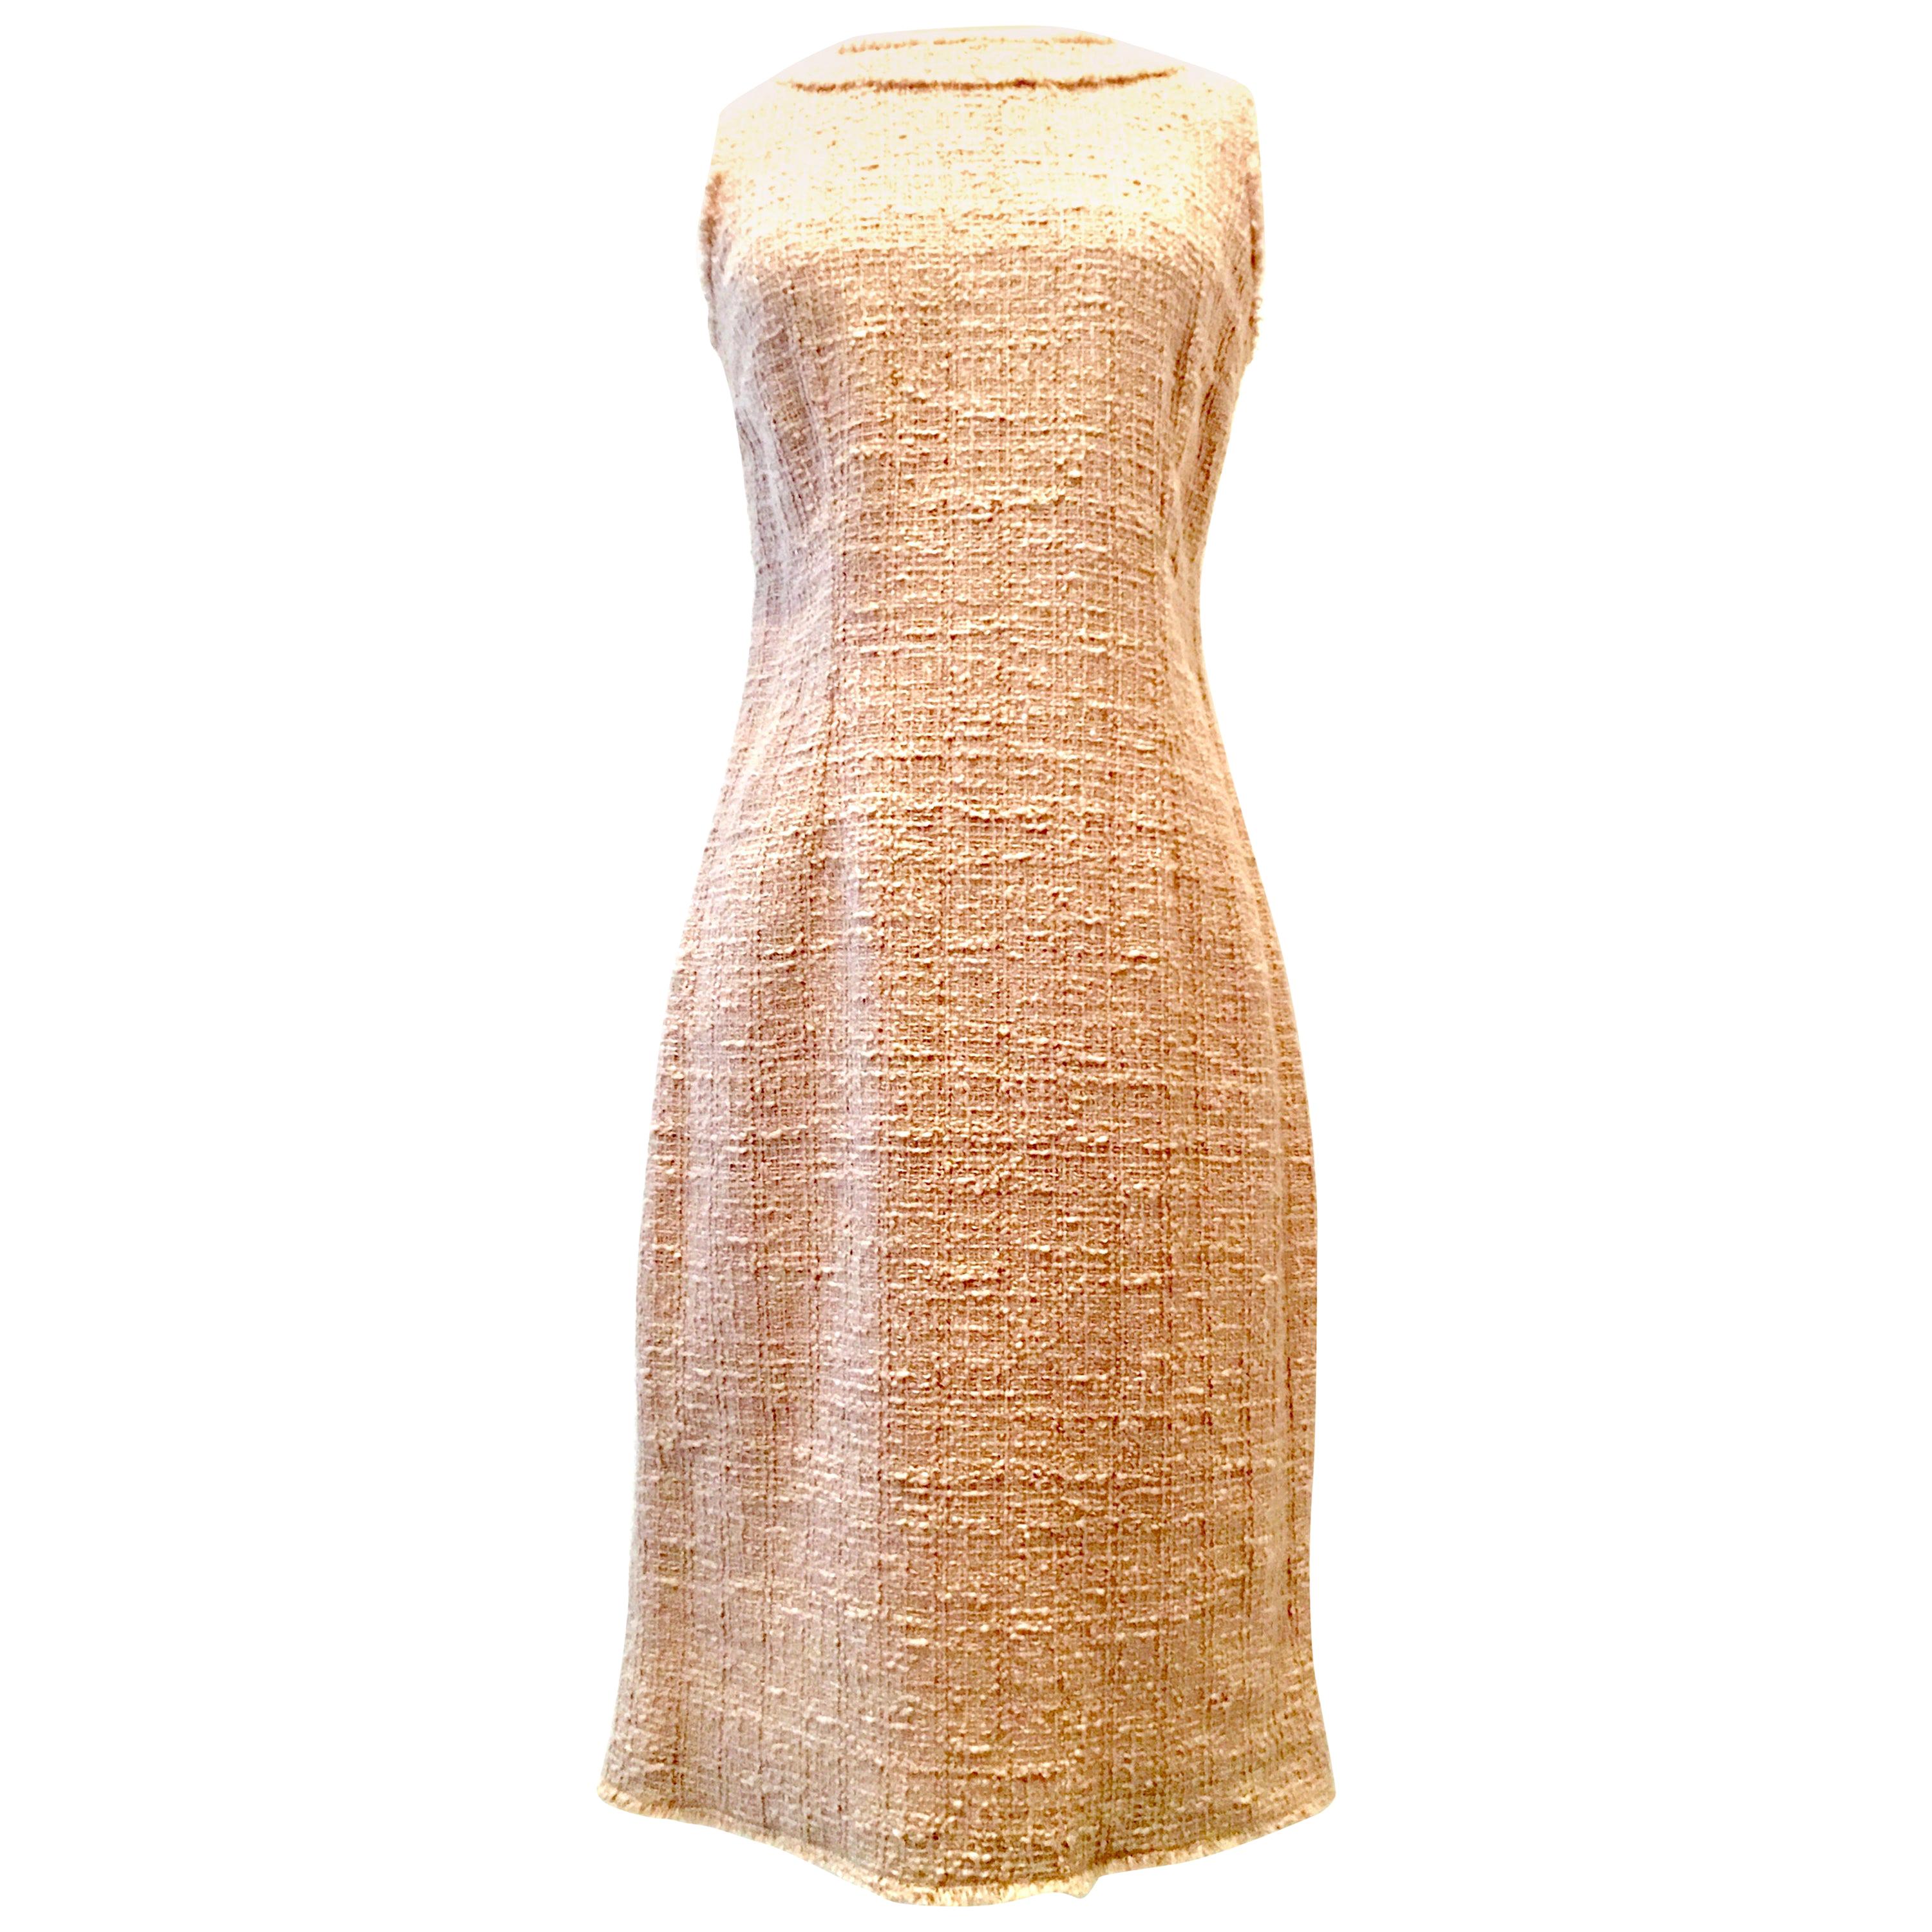 21st Century & New Italian Boucle Shift Dress By, Dolce & Gabbana - Size 42 For Sale